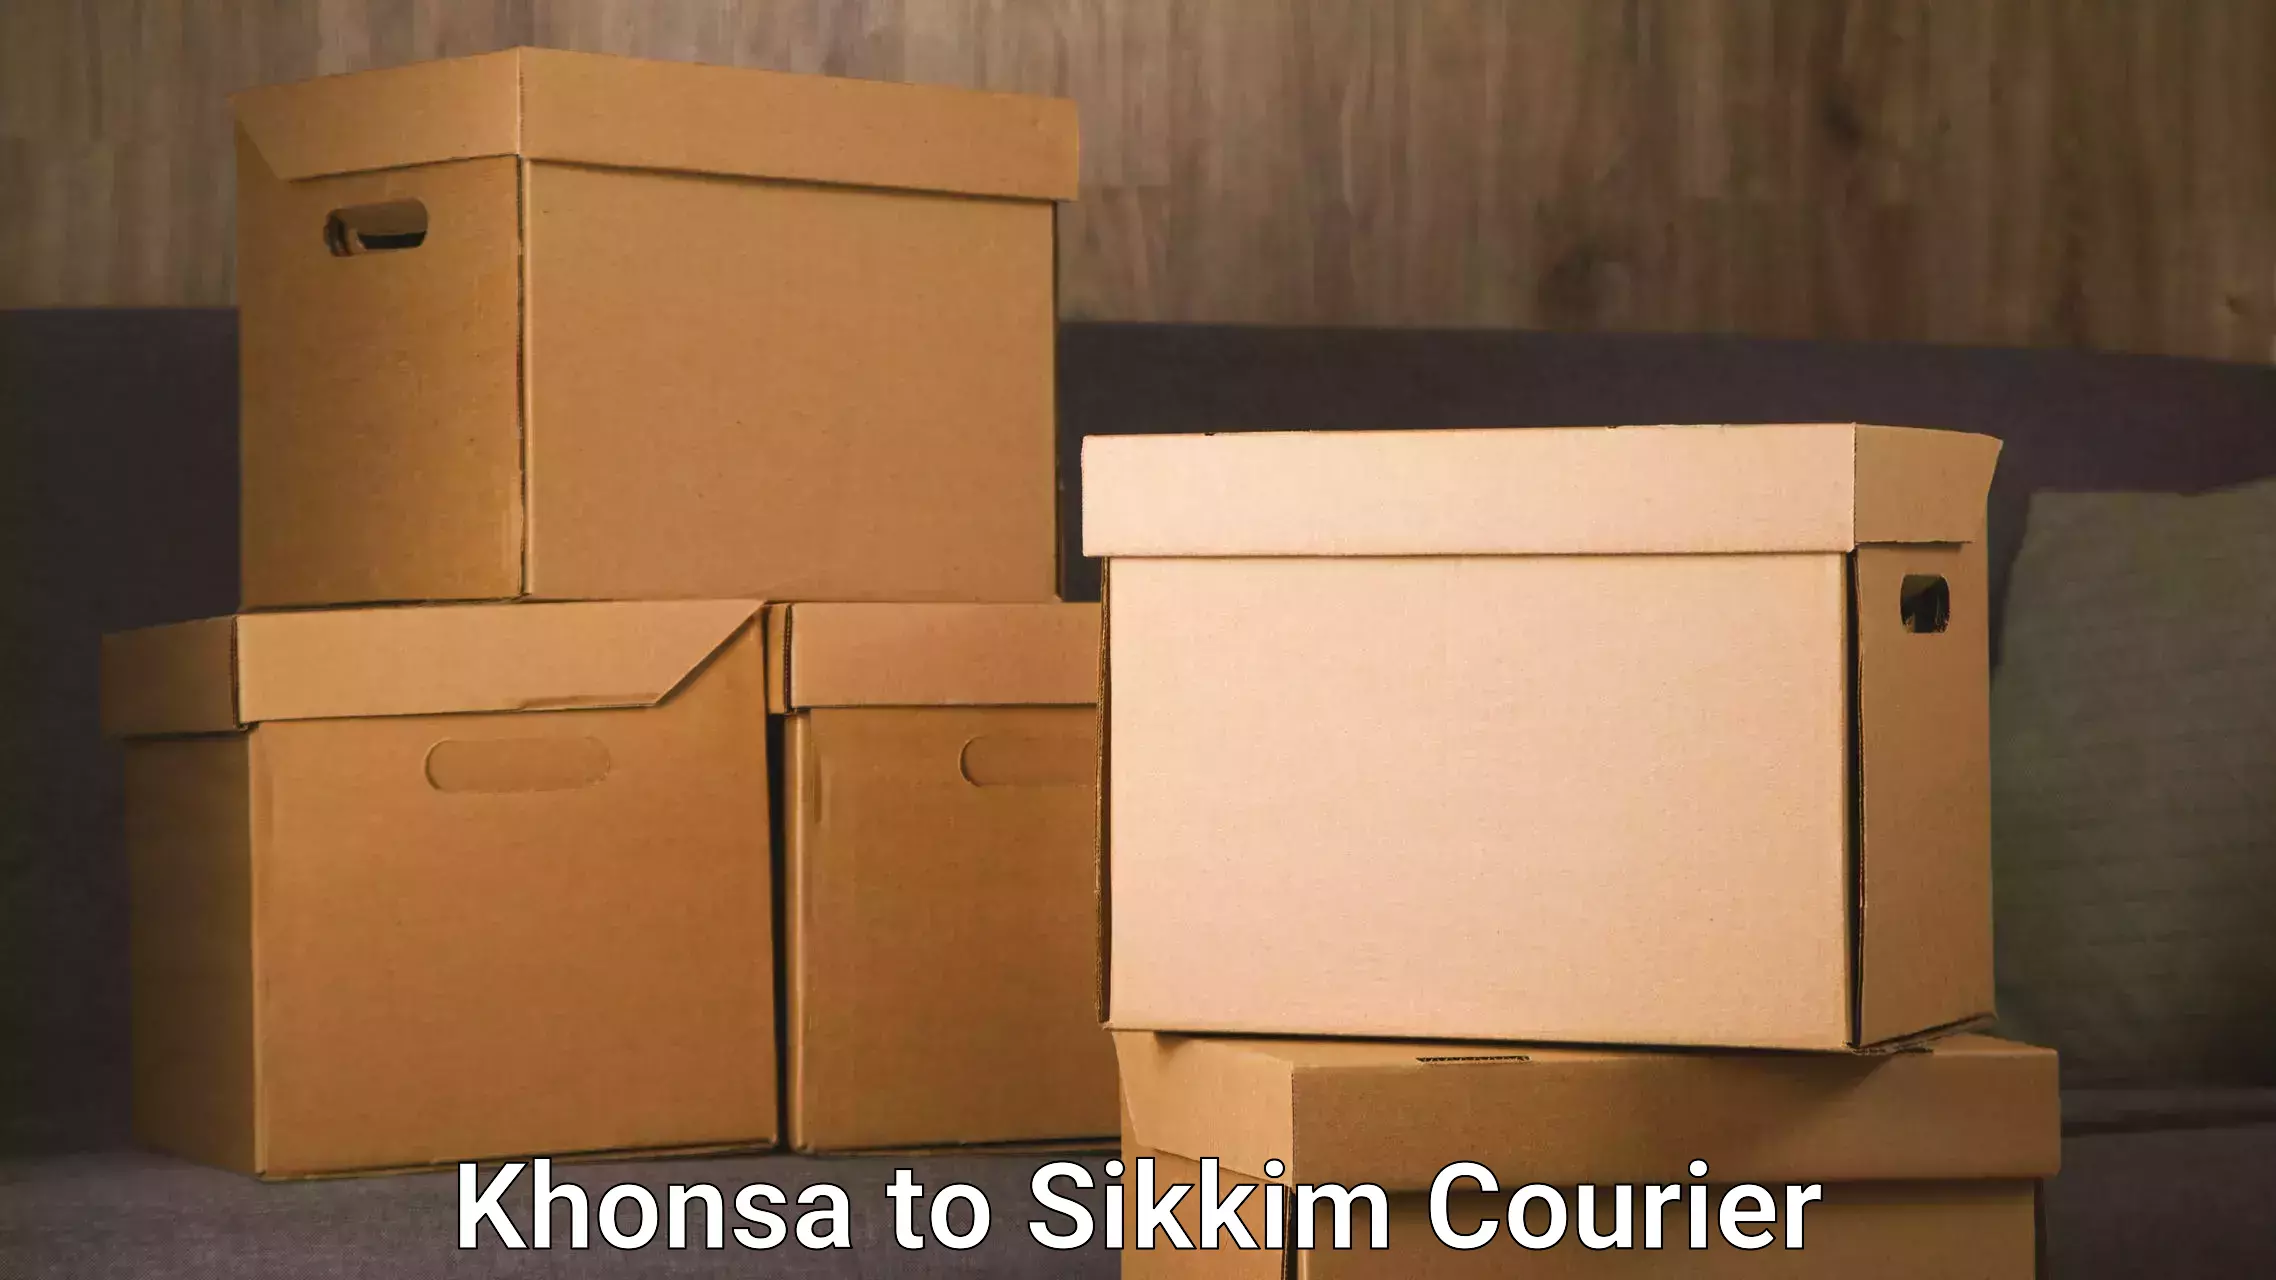 Sustainable delivery practices Khonsa to Sikkim